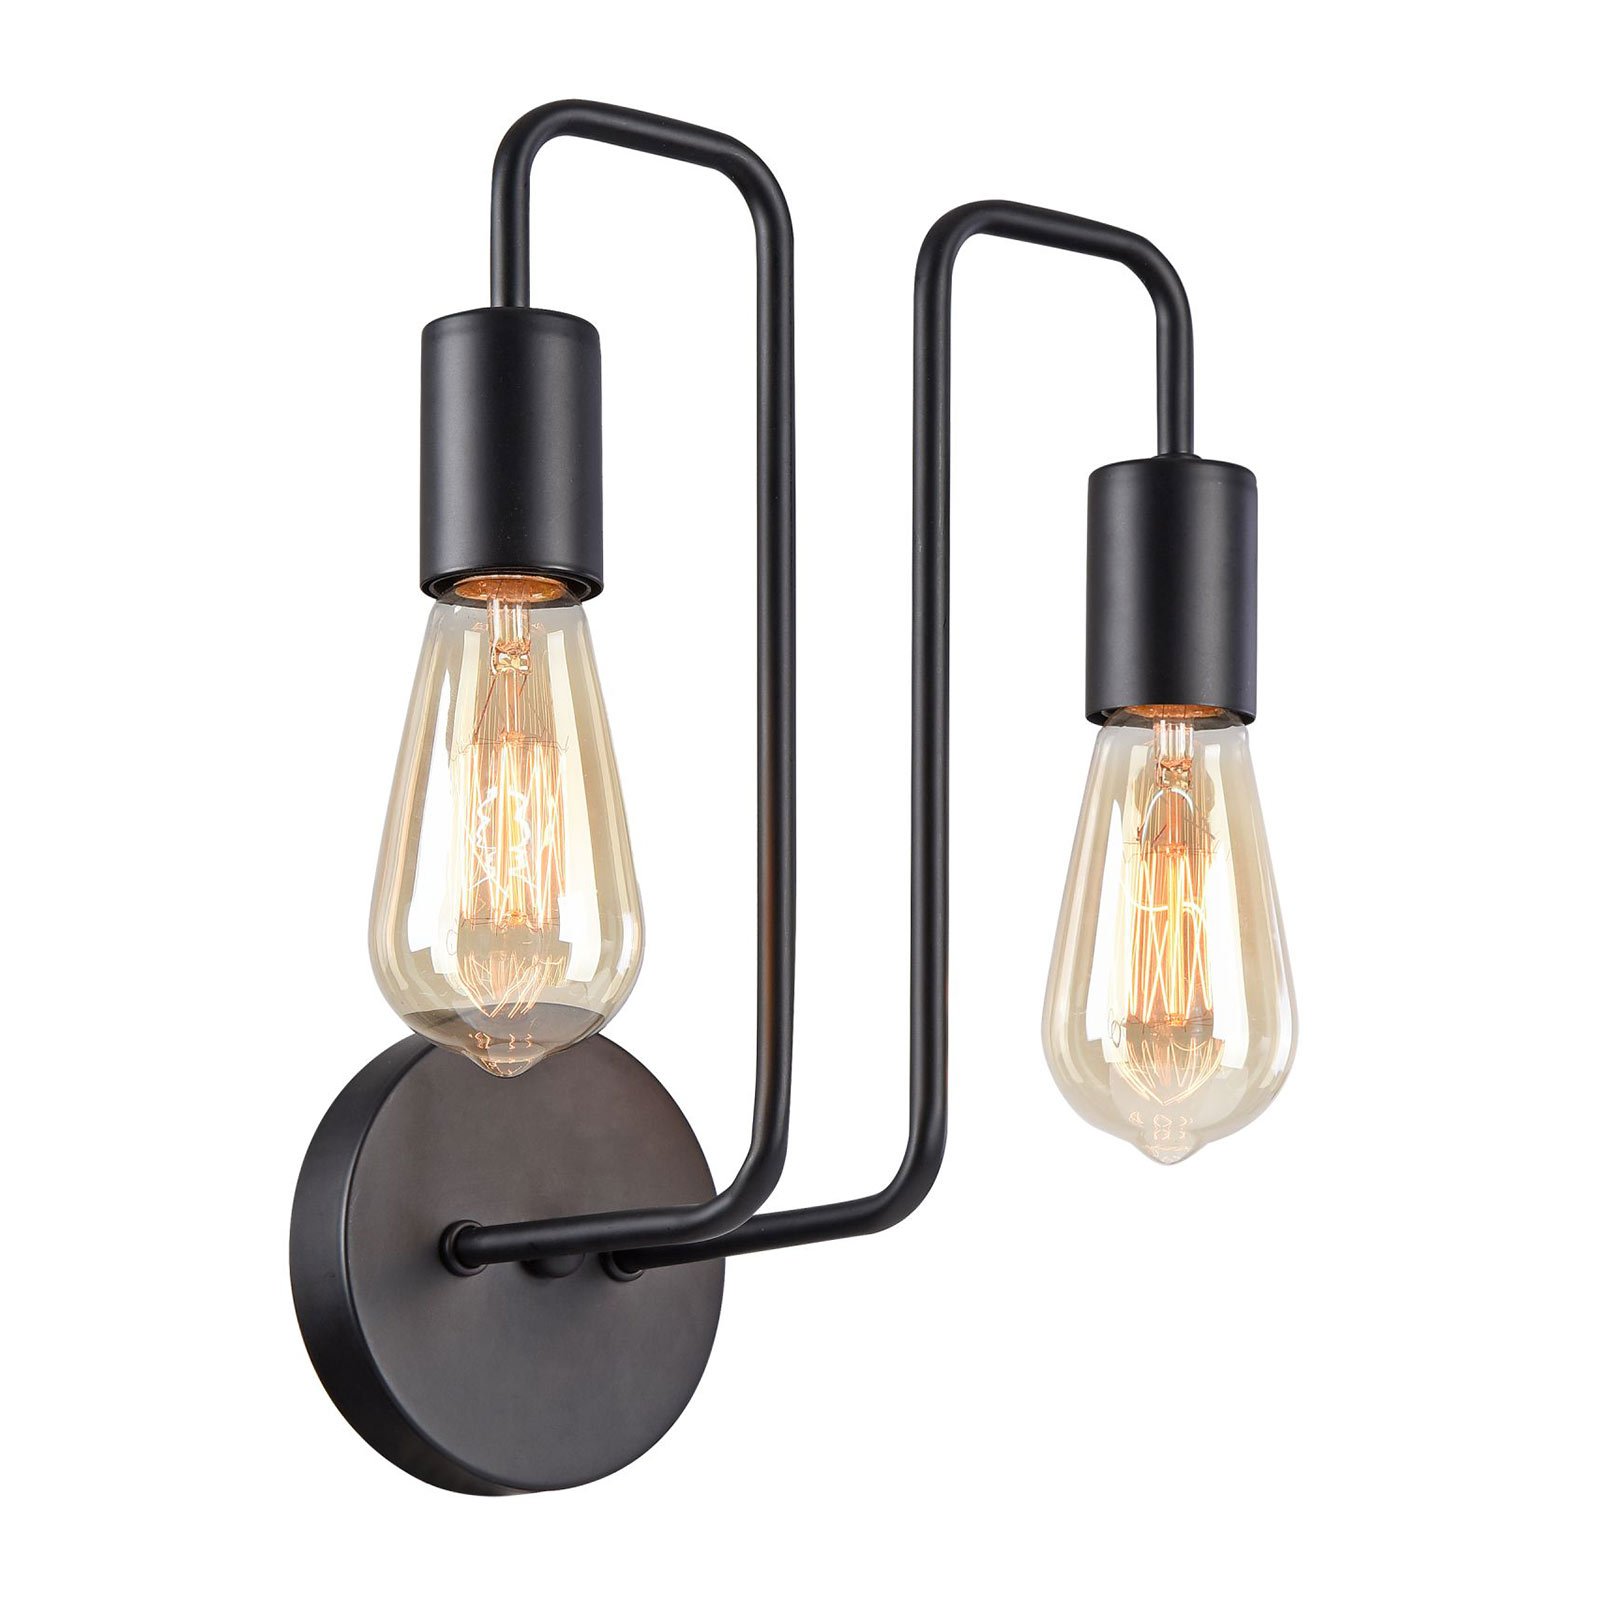 Gilbert wall light in an industrial style